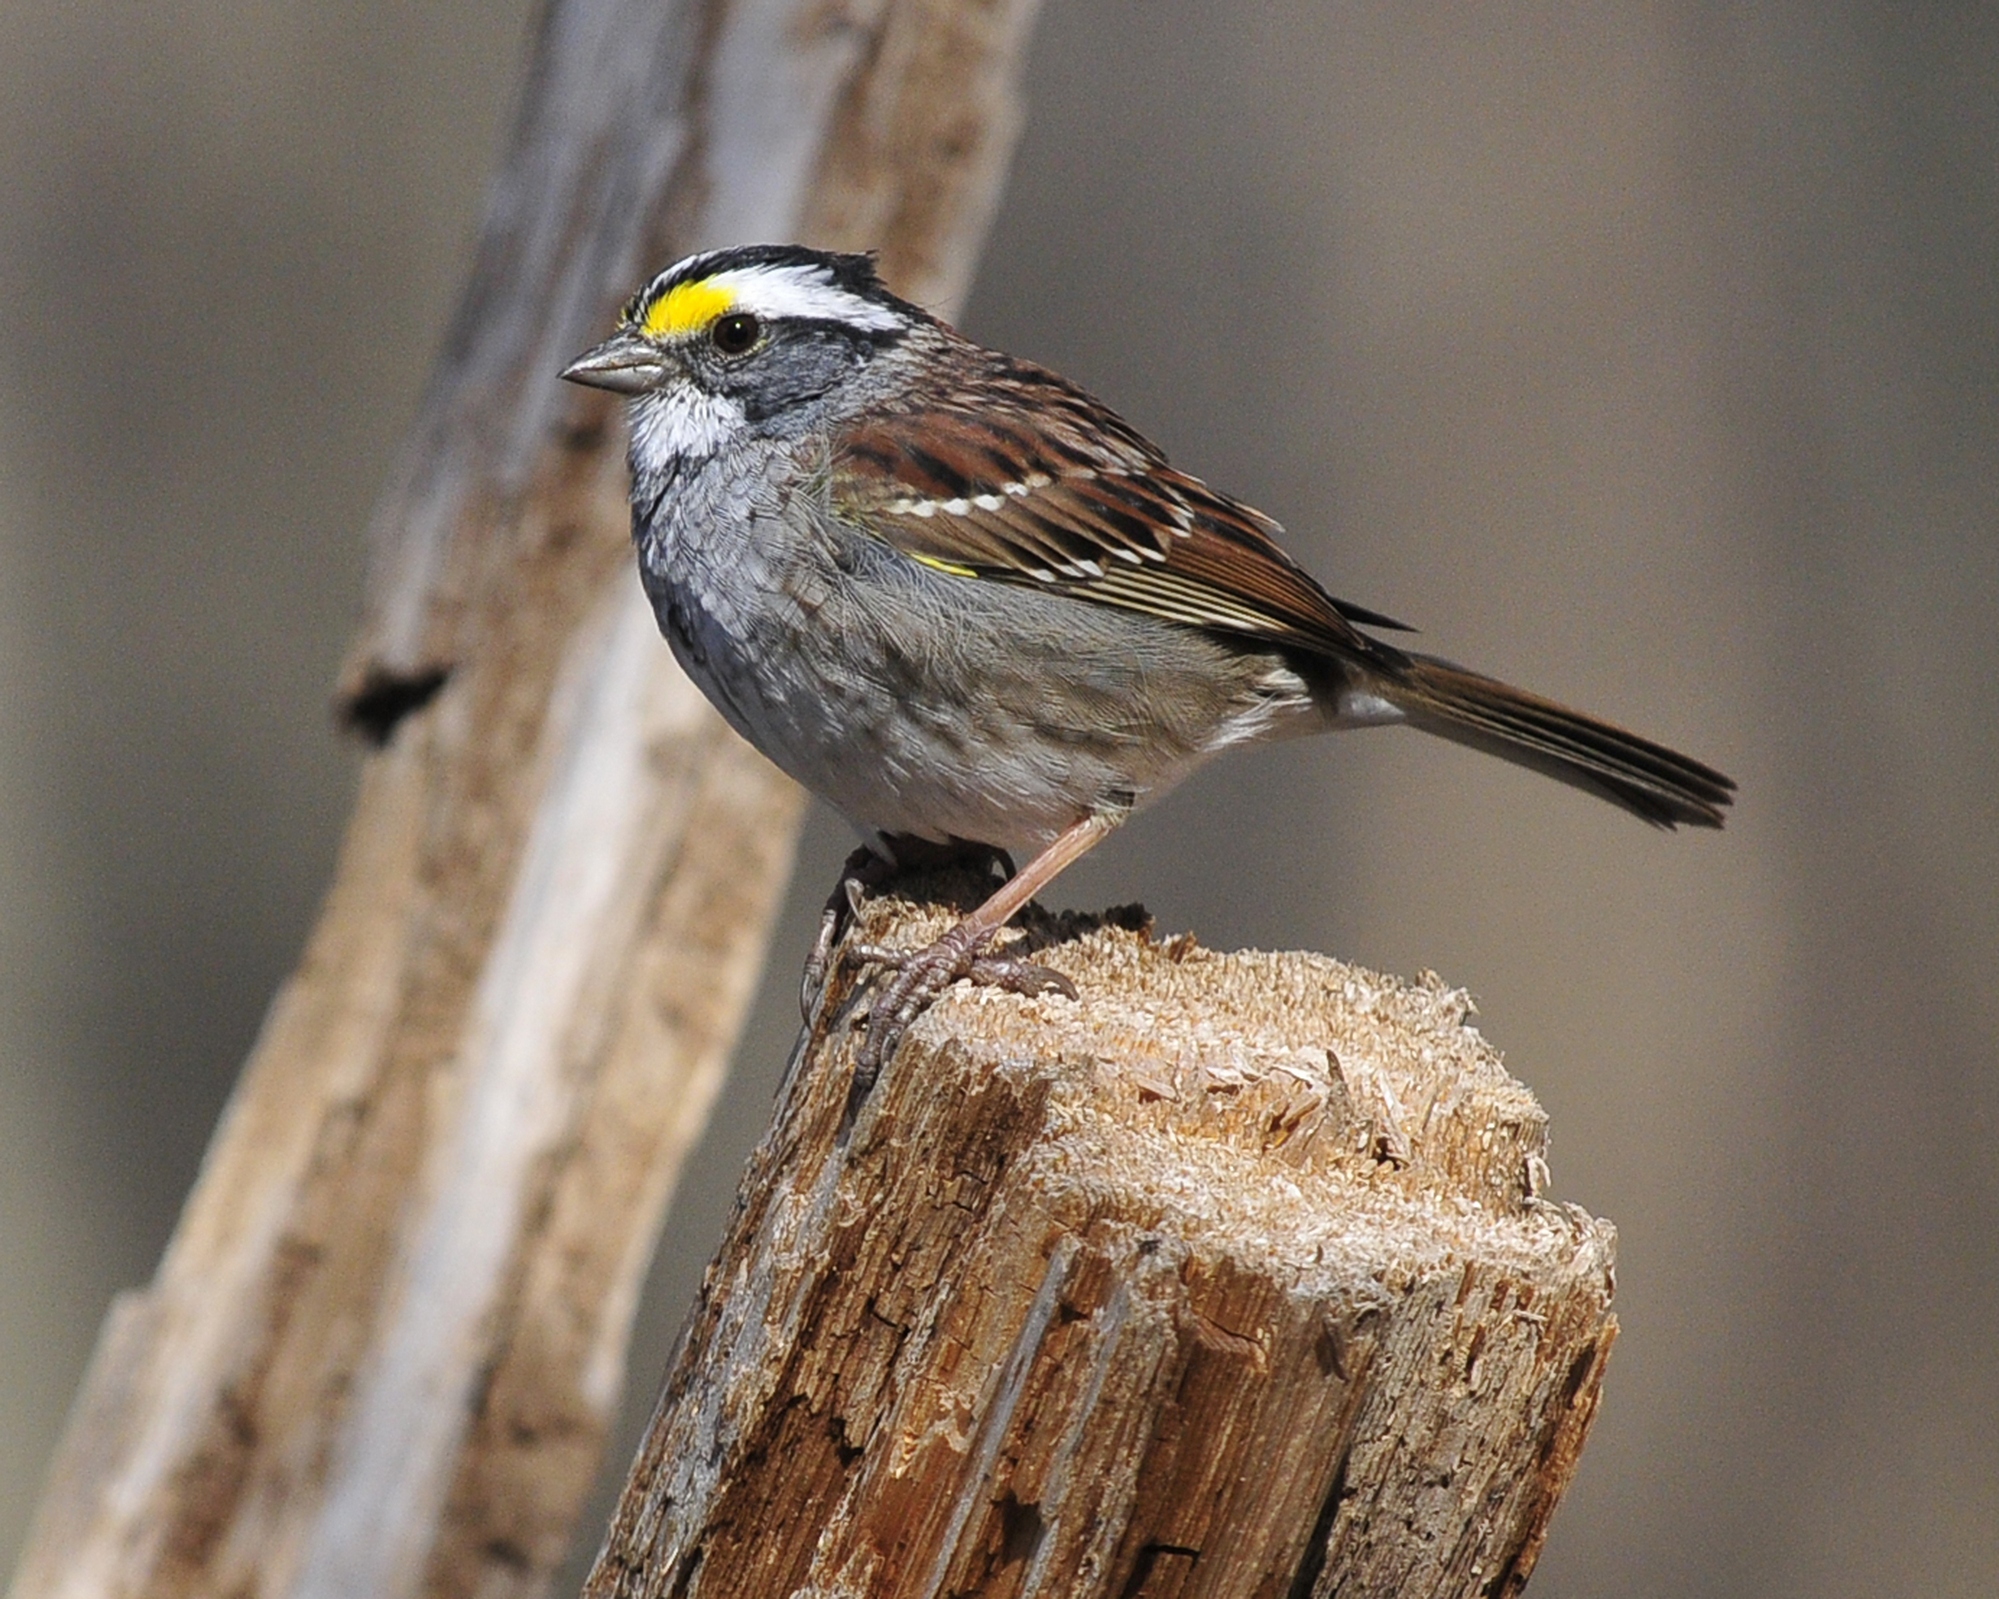 Pretty White-throated sparrow